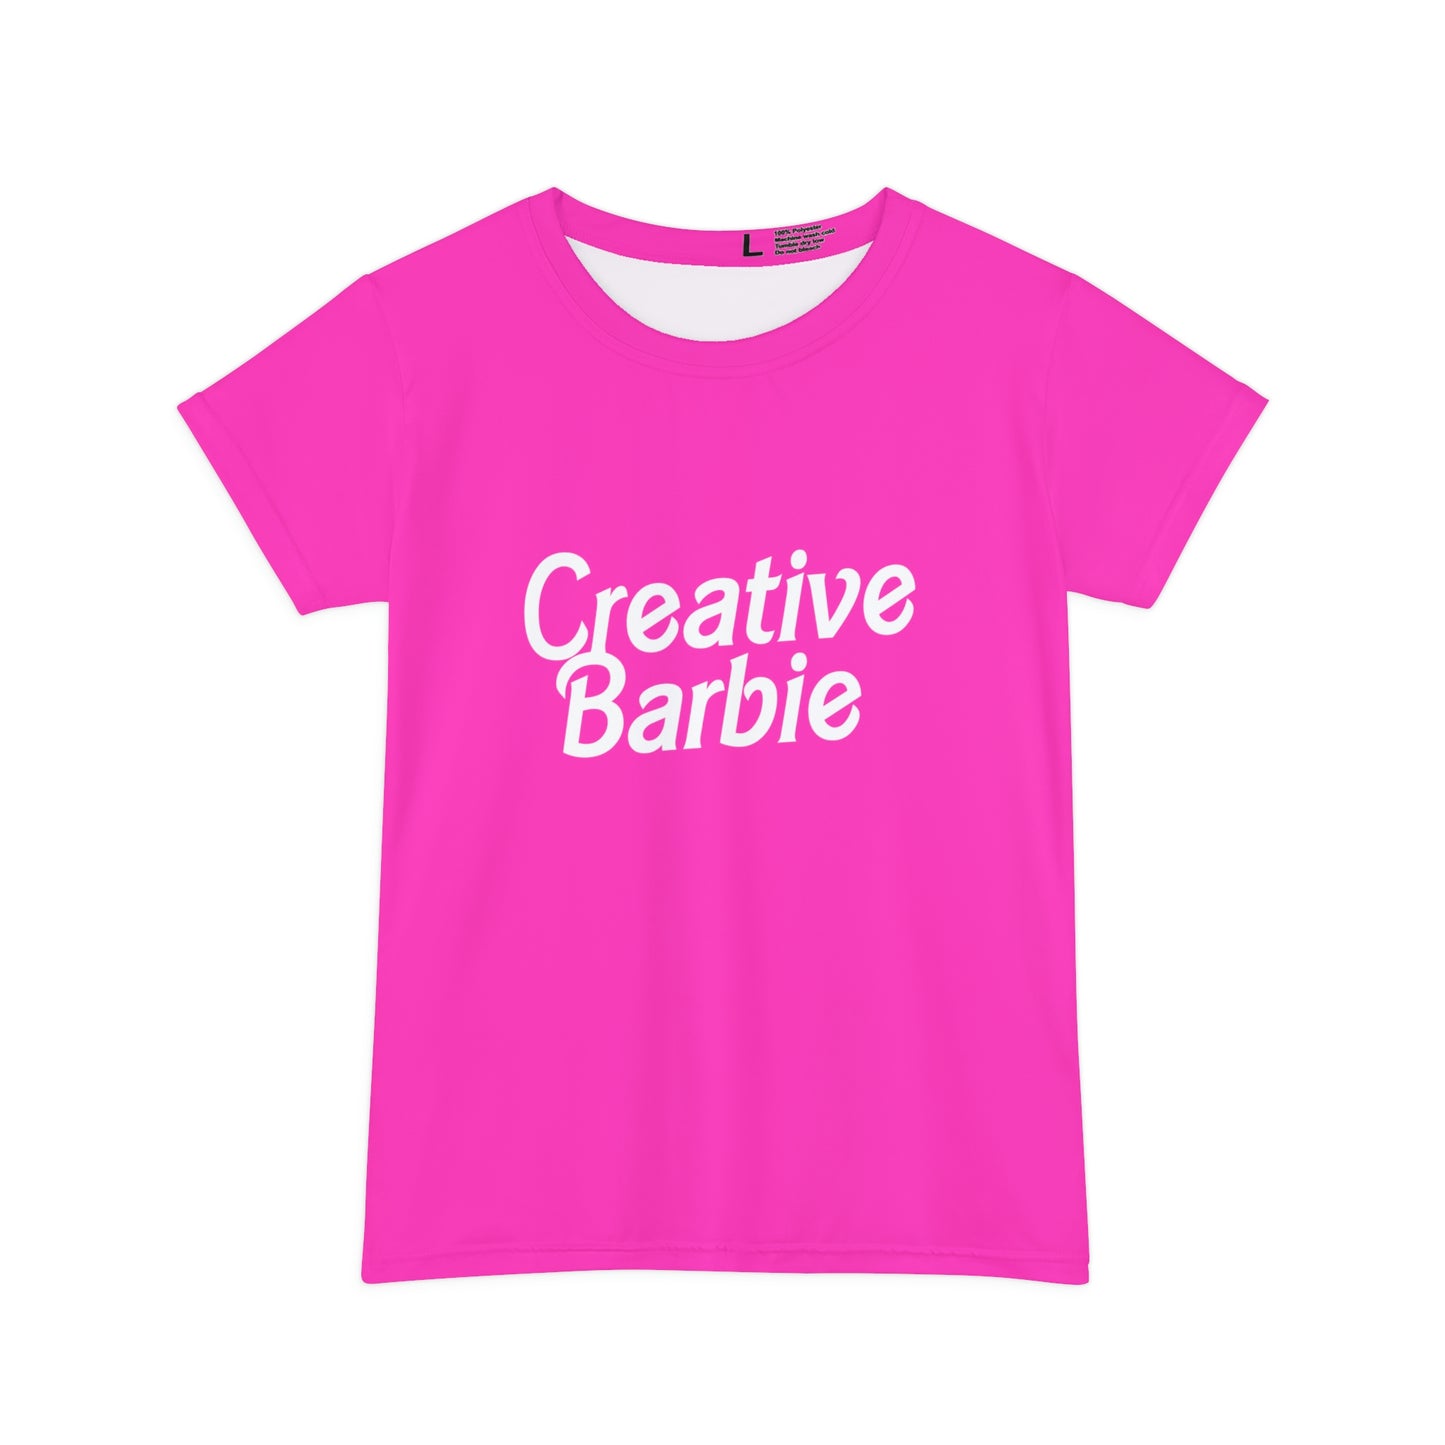 Creative Barbie, Bachelorette Party Shirts, Bridesmaid Gifts, Here comes the Party Tees, Group Party Favor Shirts, Bridal Party Shirt for women